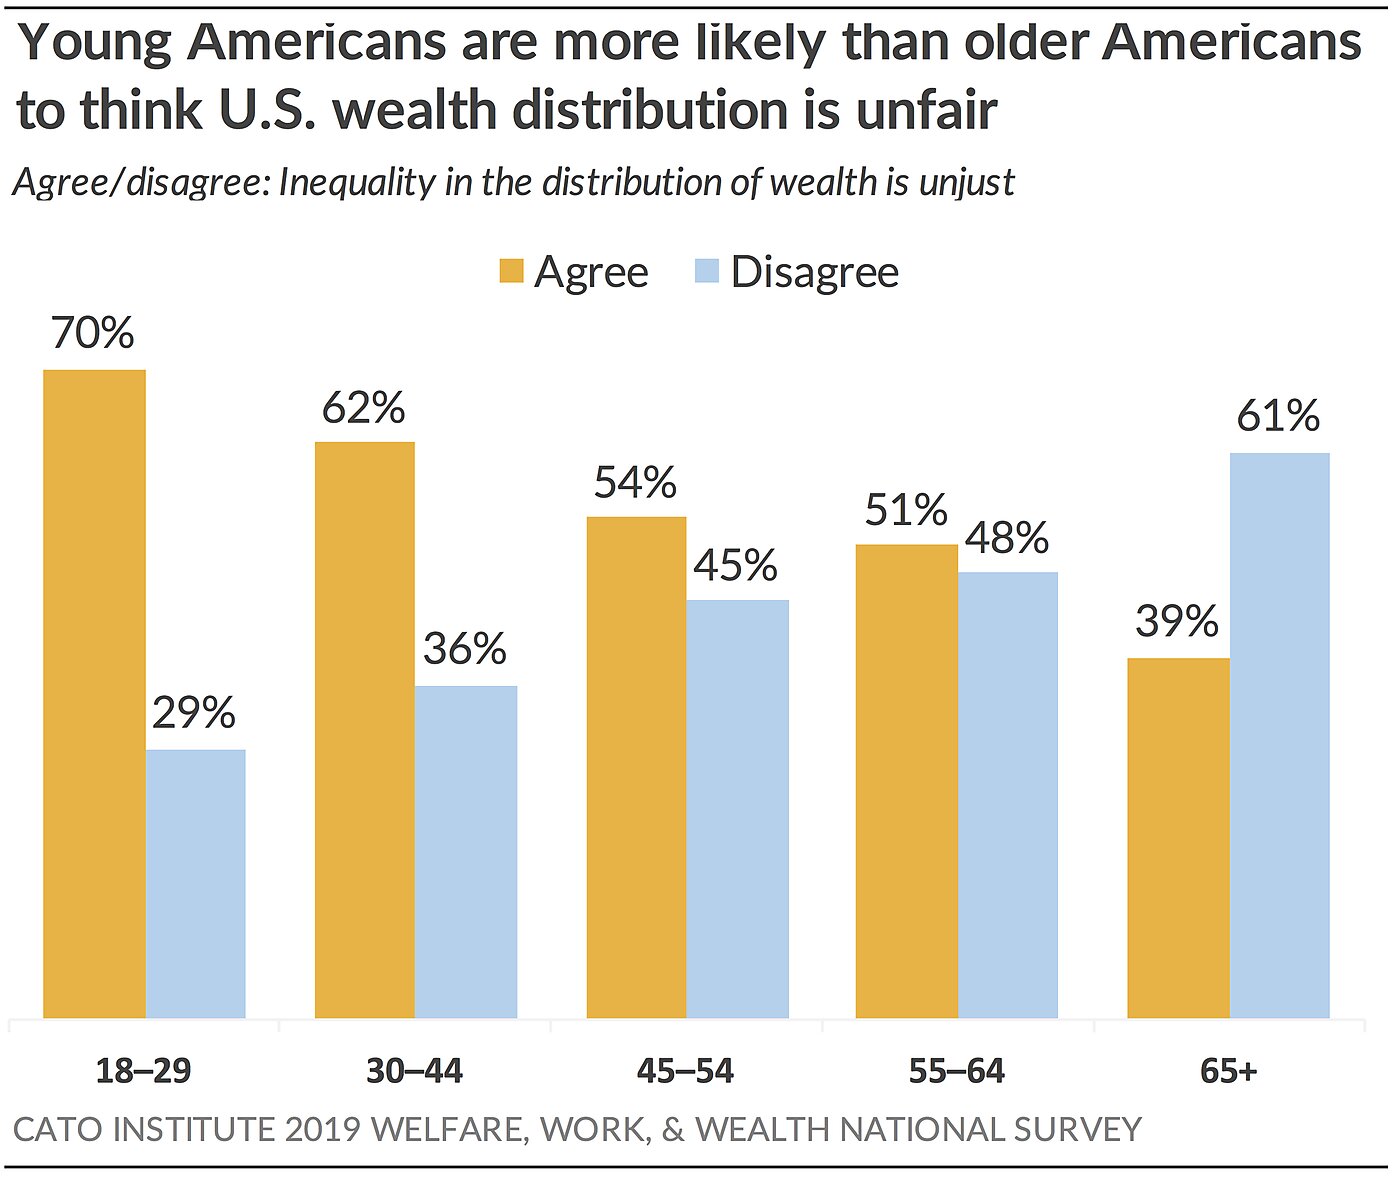 Young Americans More Likely to Think Wealth Distribution Fair